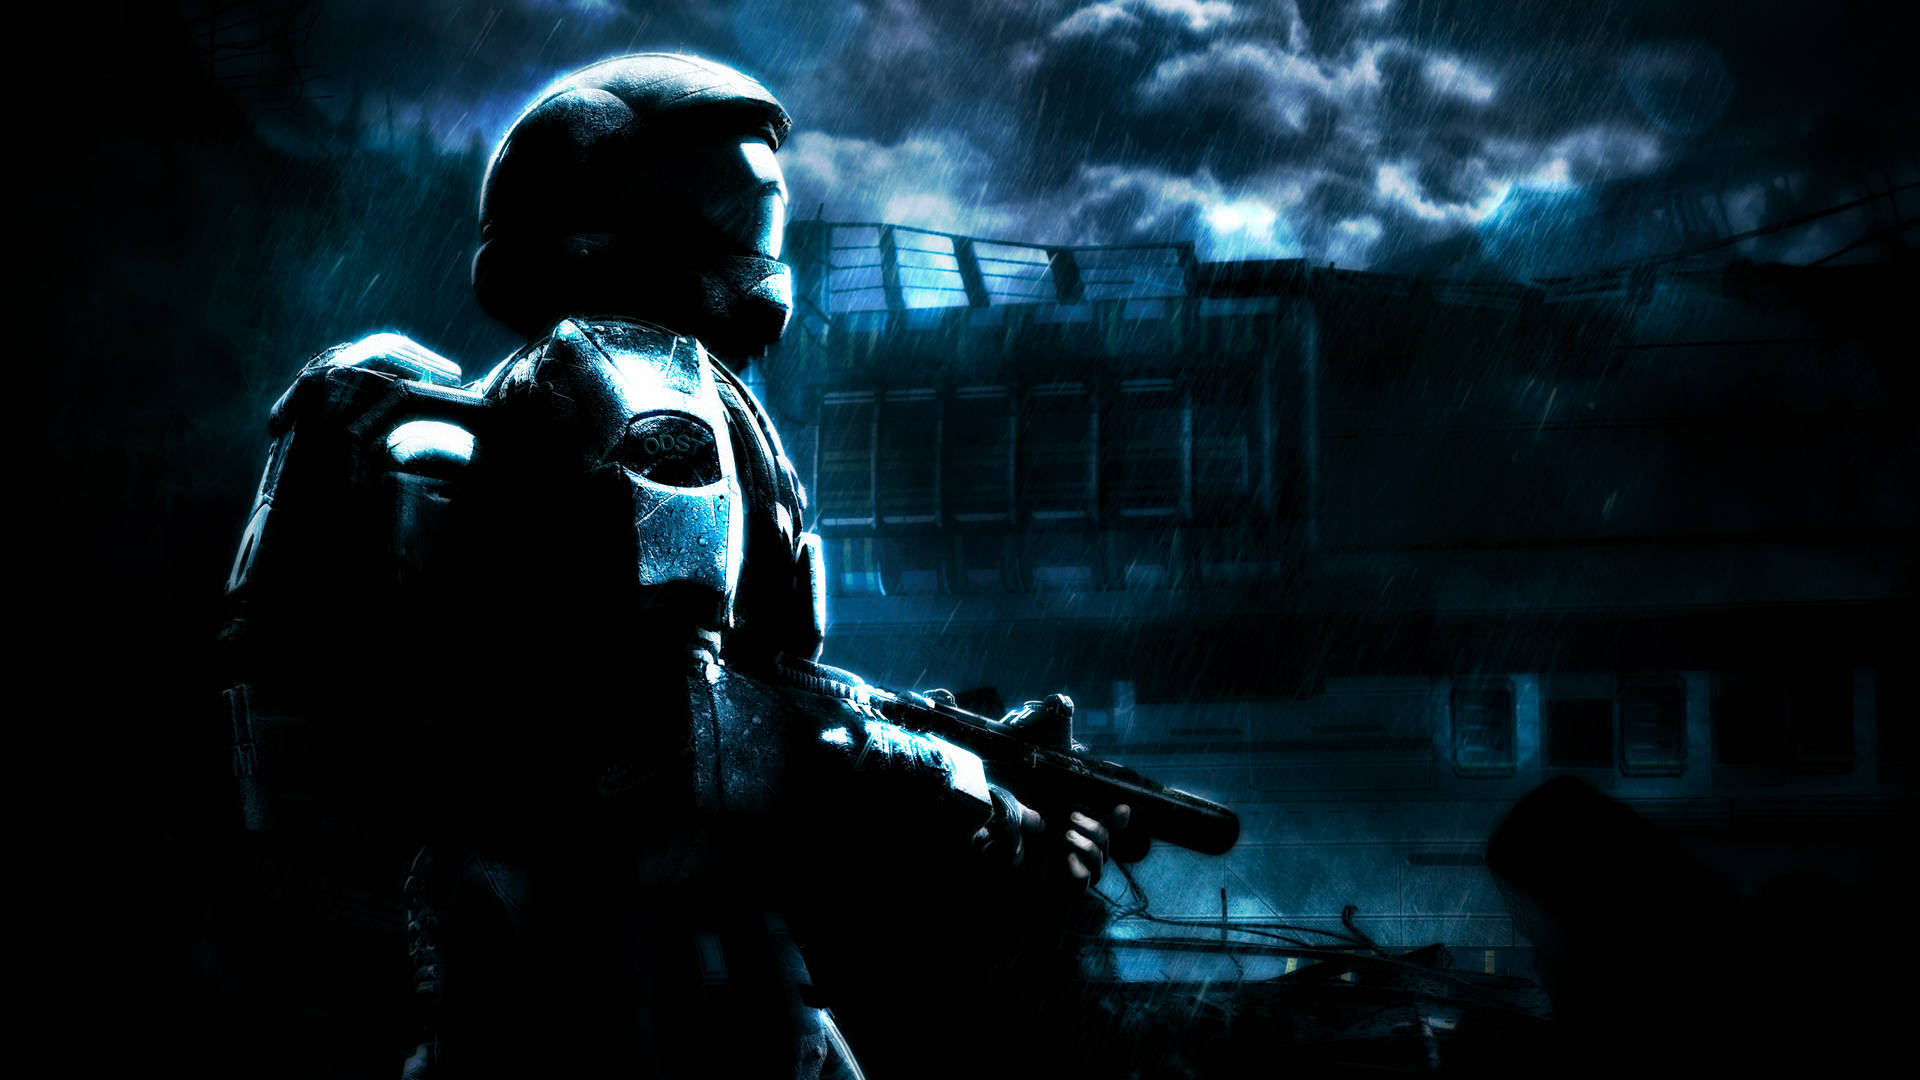 Halo 3 Thick Clouds Wallpaper